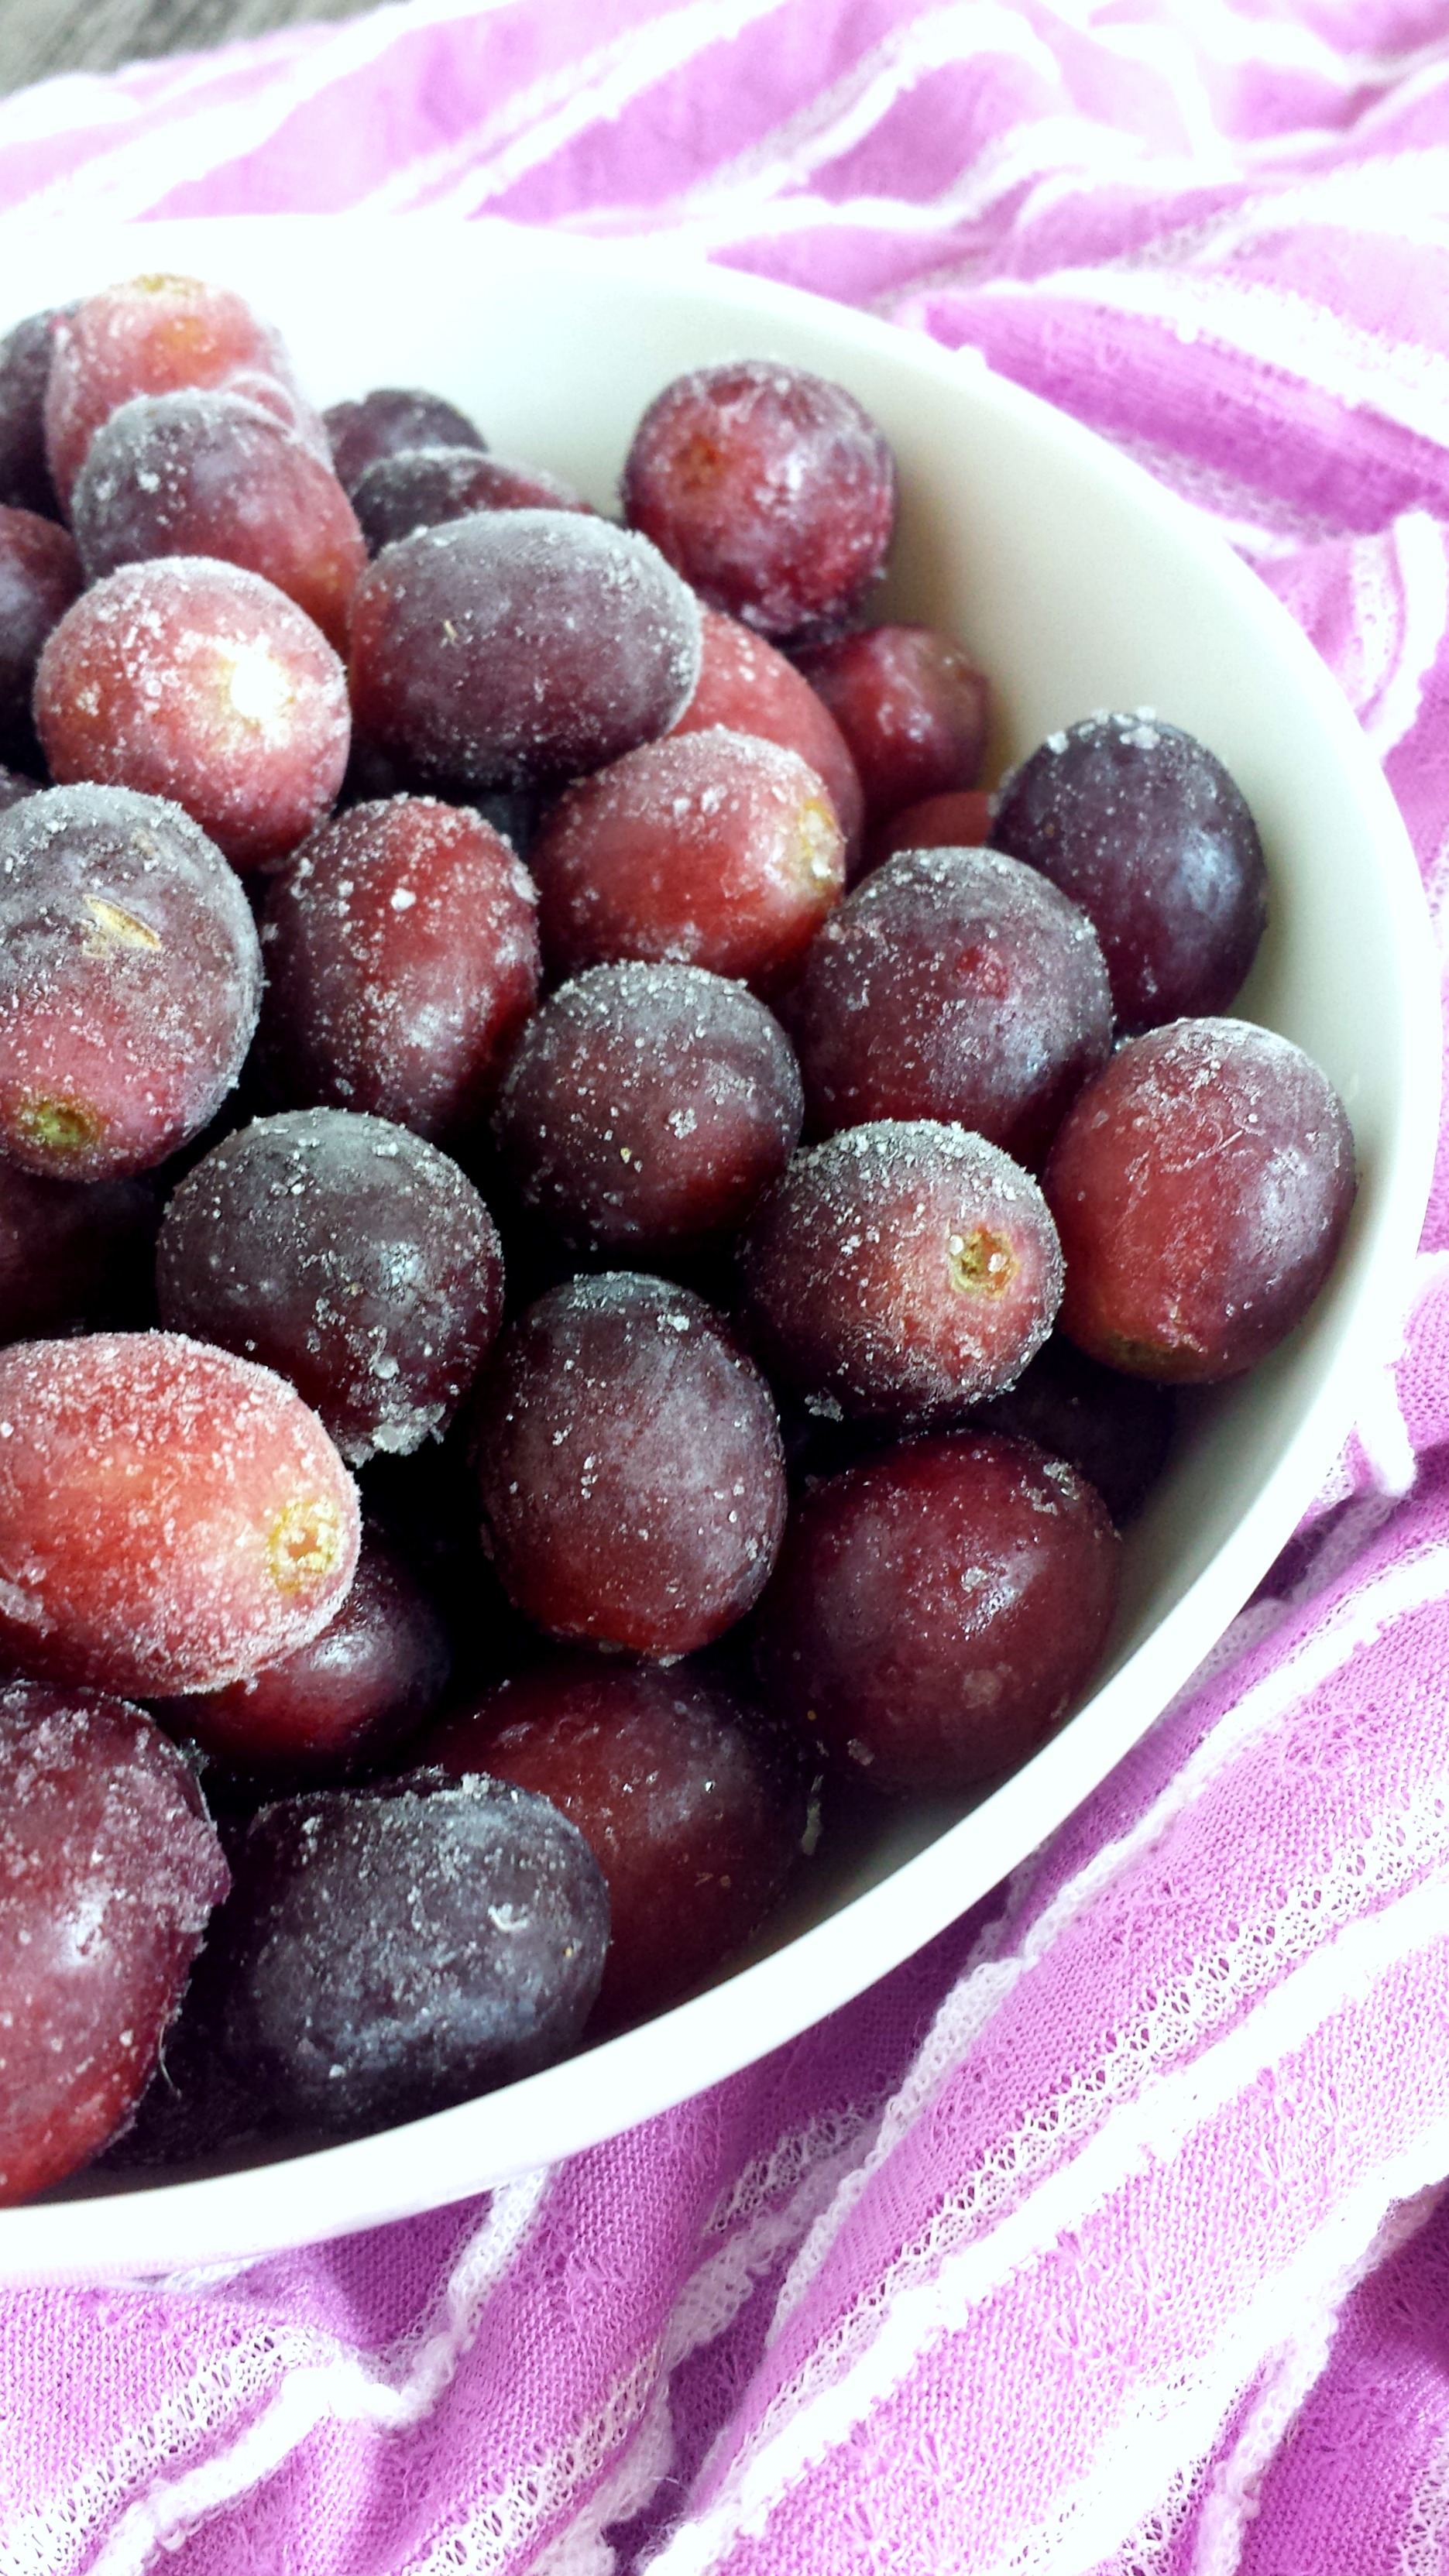 Frozen Red Grapes 2